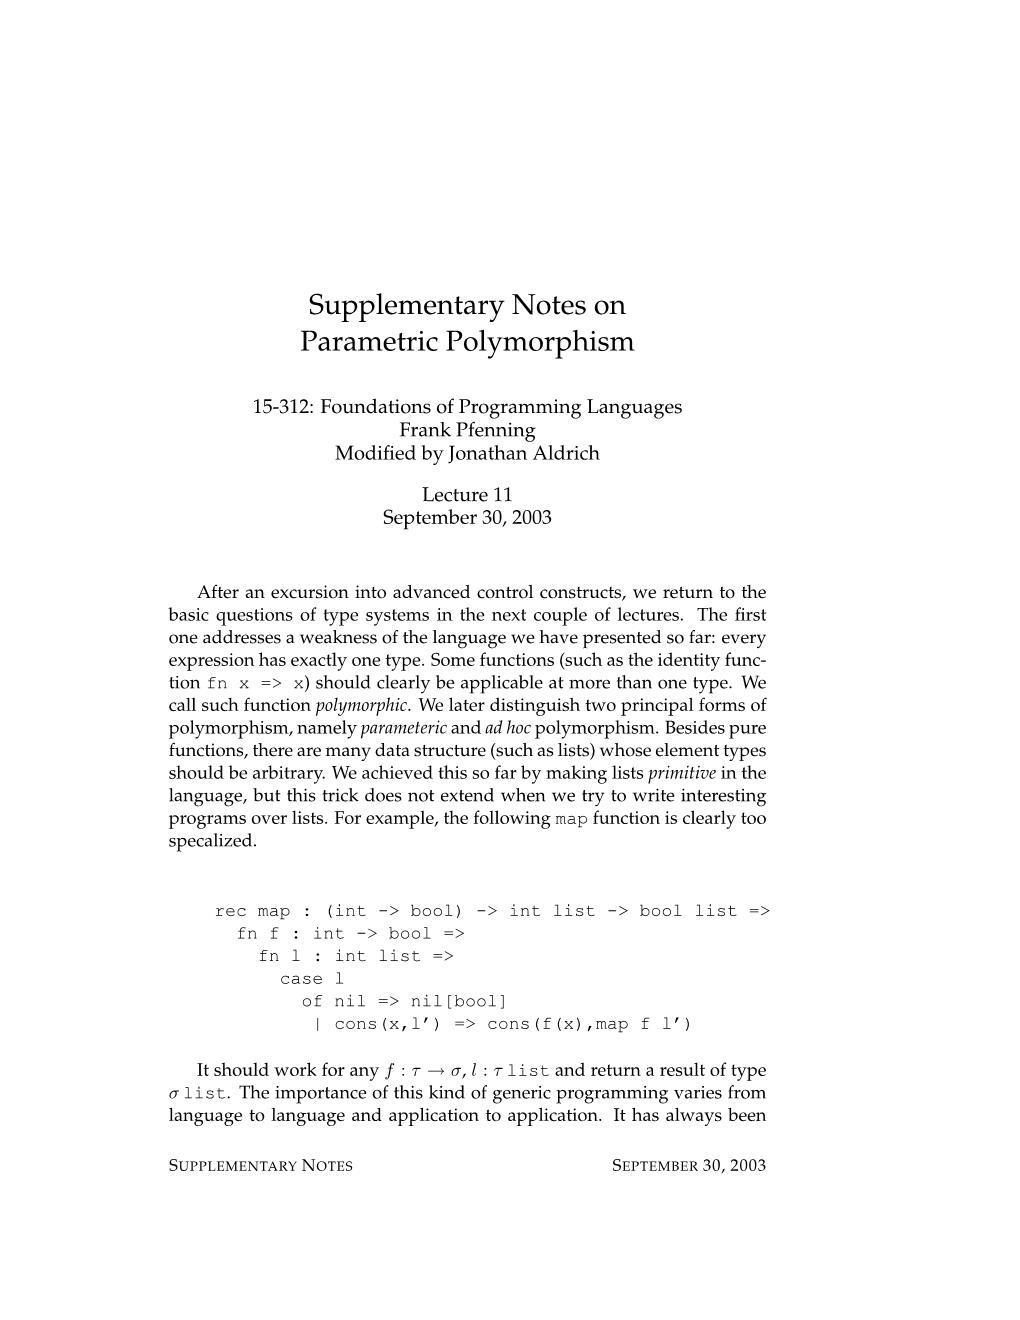 Supplementary Notes on Parametric Polymorphism